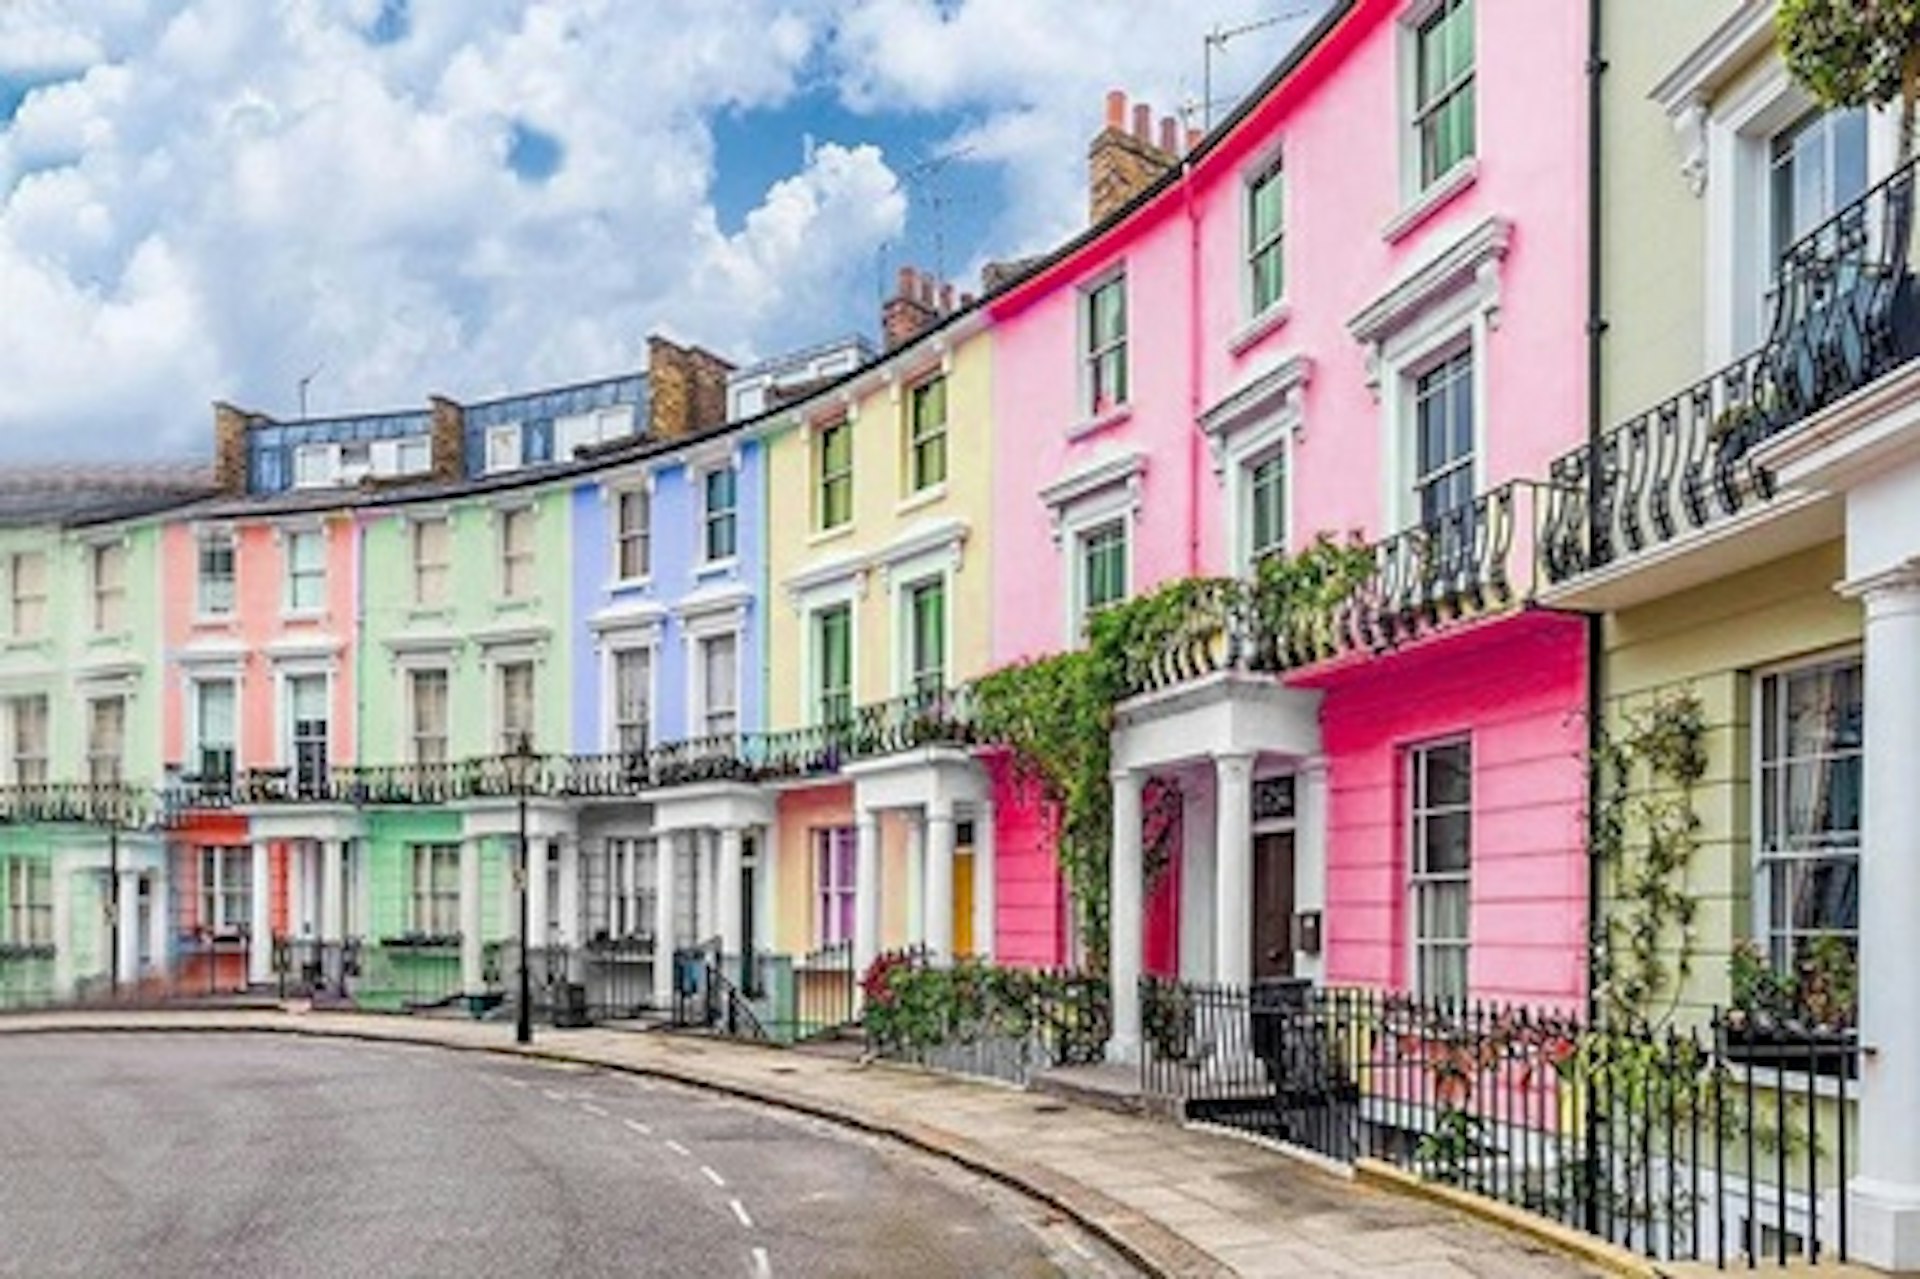 Photography Course and Colourful Photo Tour of London's Notting Hill 2